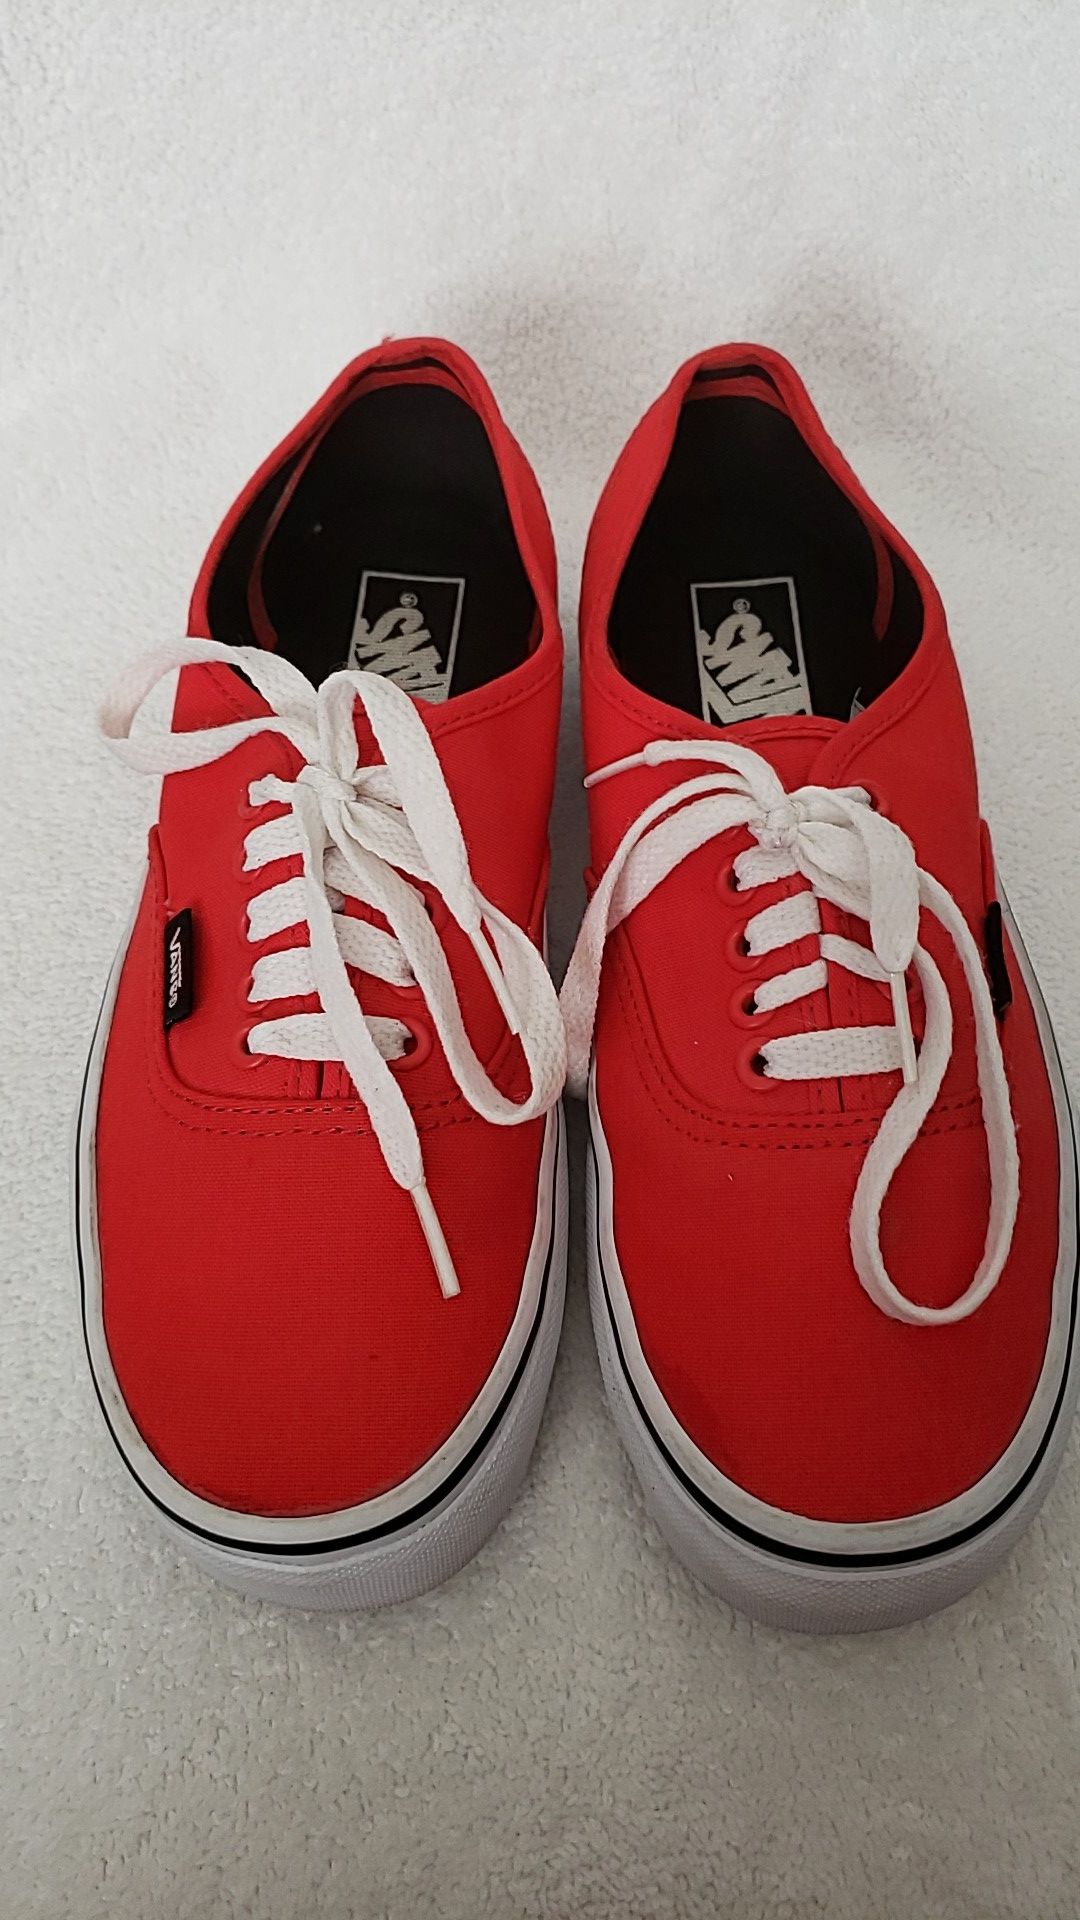 Brand new Vans off the well shoes size is men 7.5 women 9